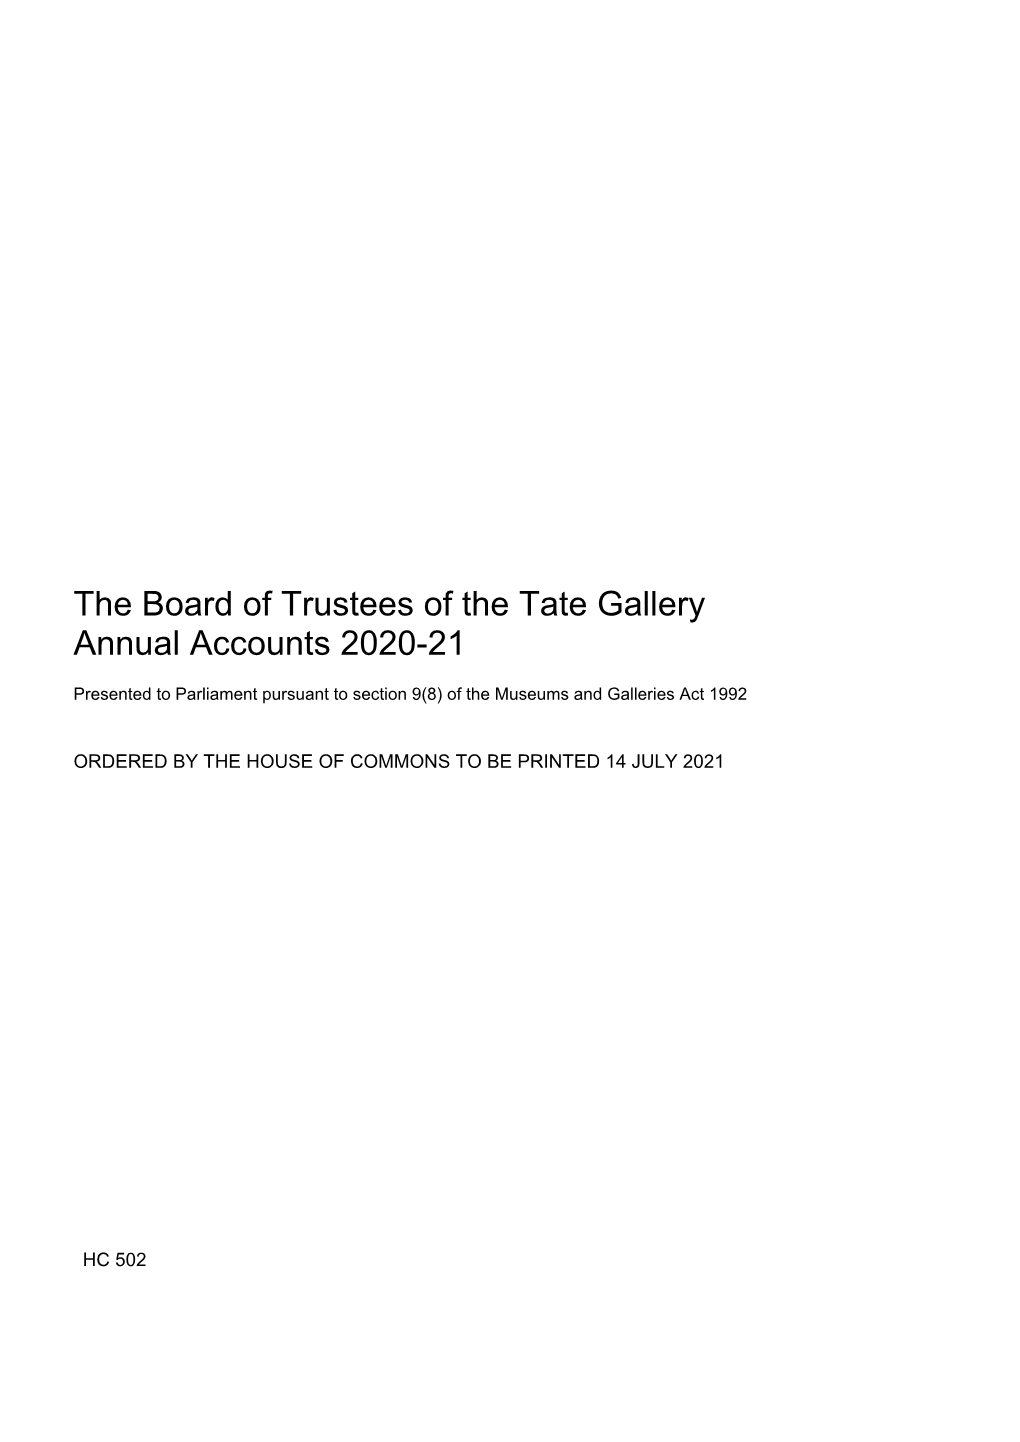 The Board of Trustees of the Tate Gallery Annual Accounts 2020-21